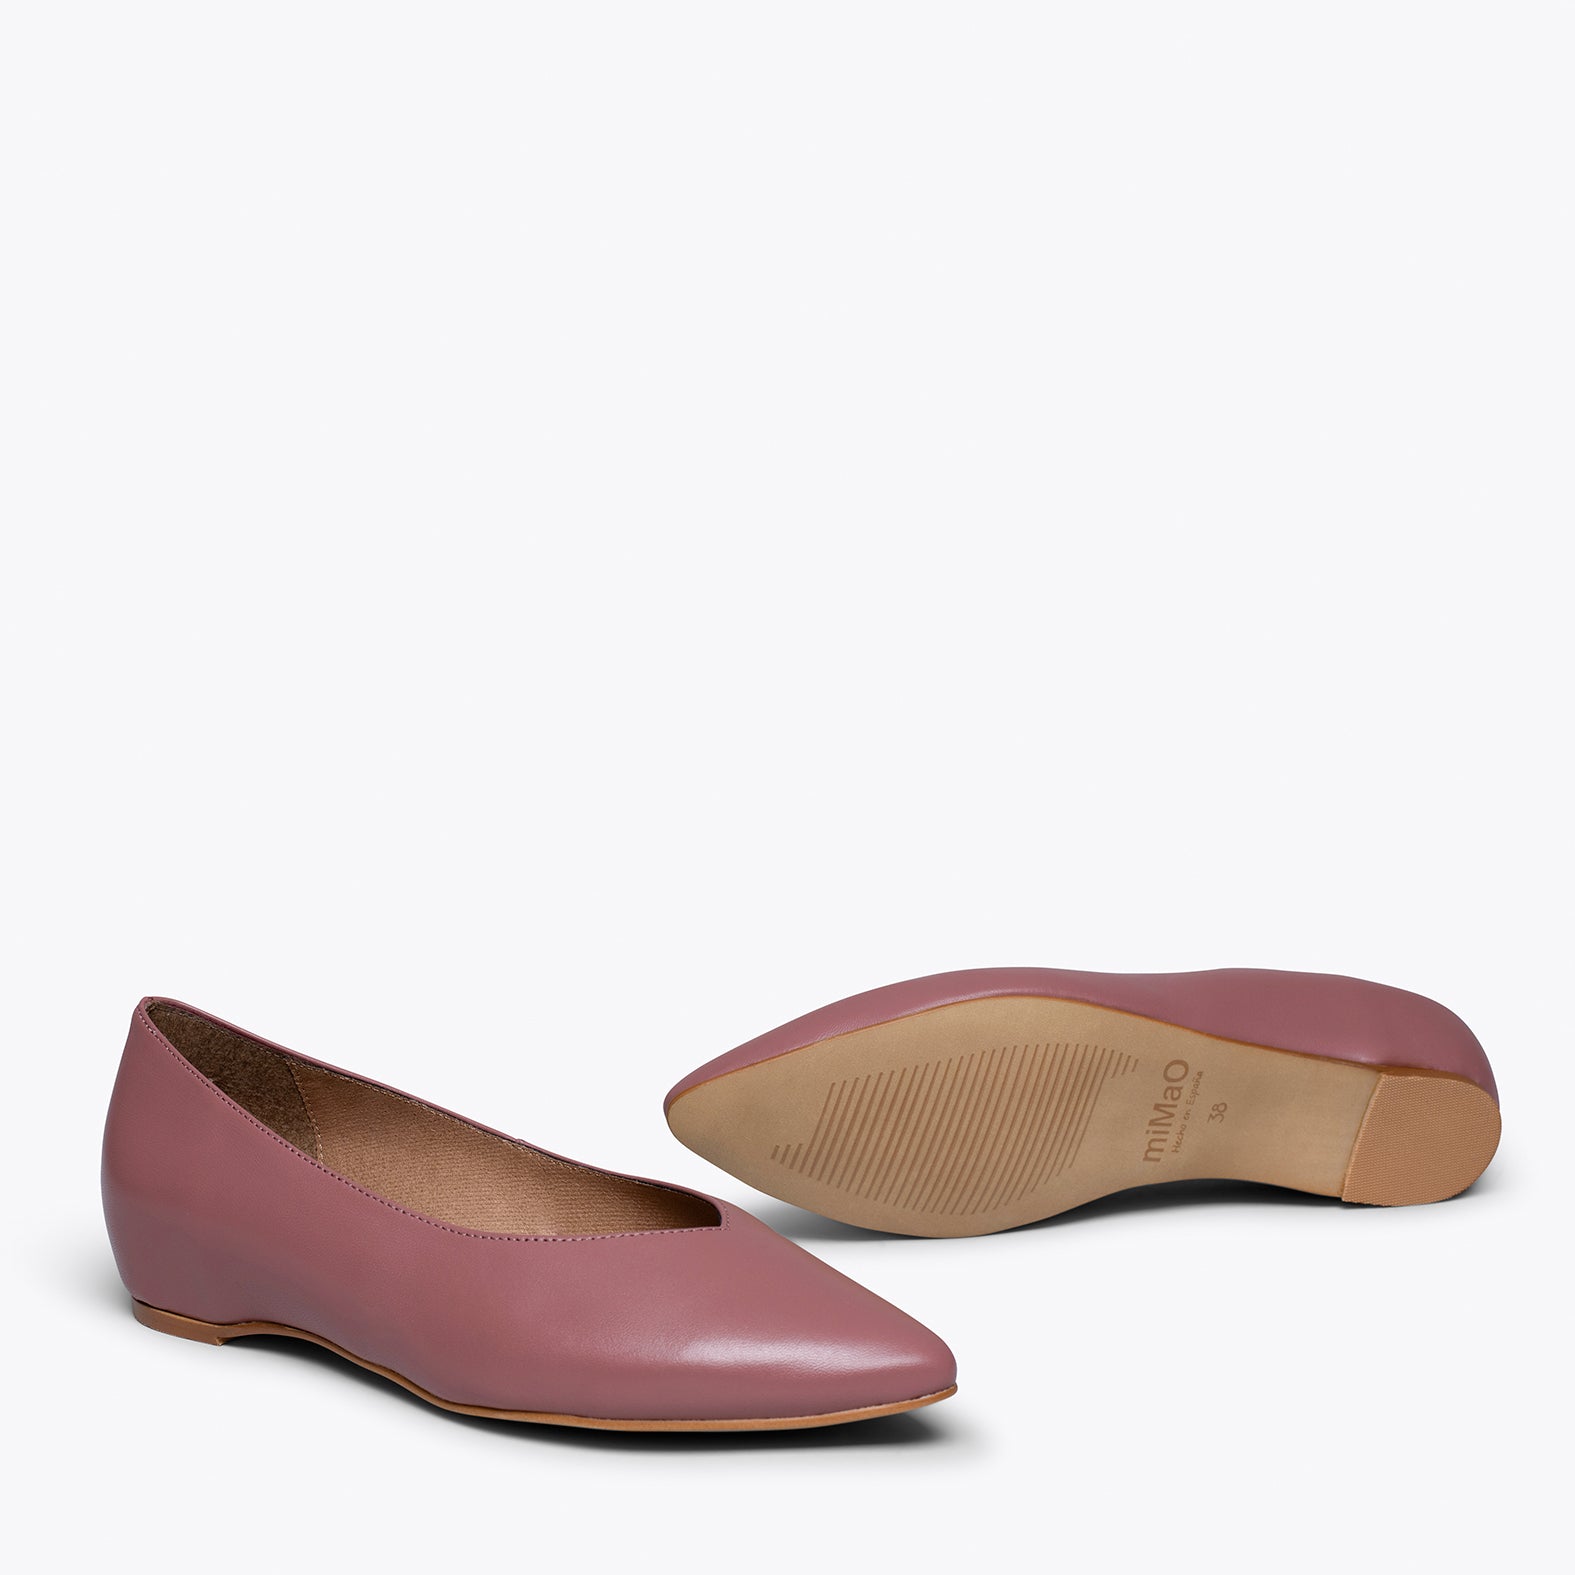 URBAN WEDGE- ASH PINK flat shoes with hidden wedge